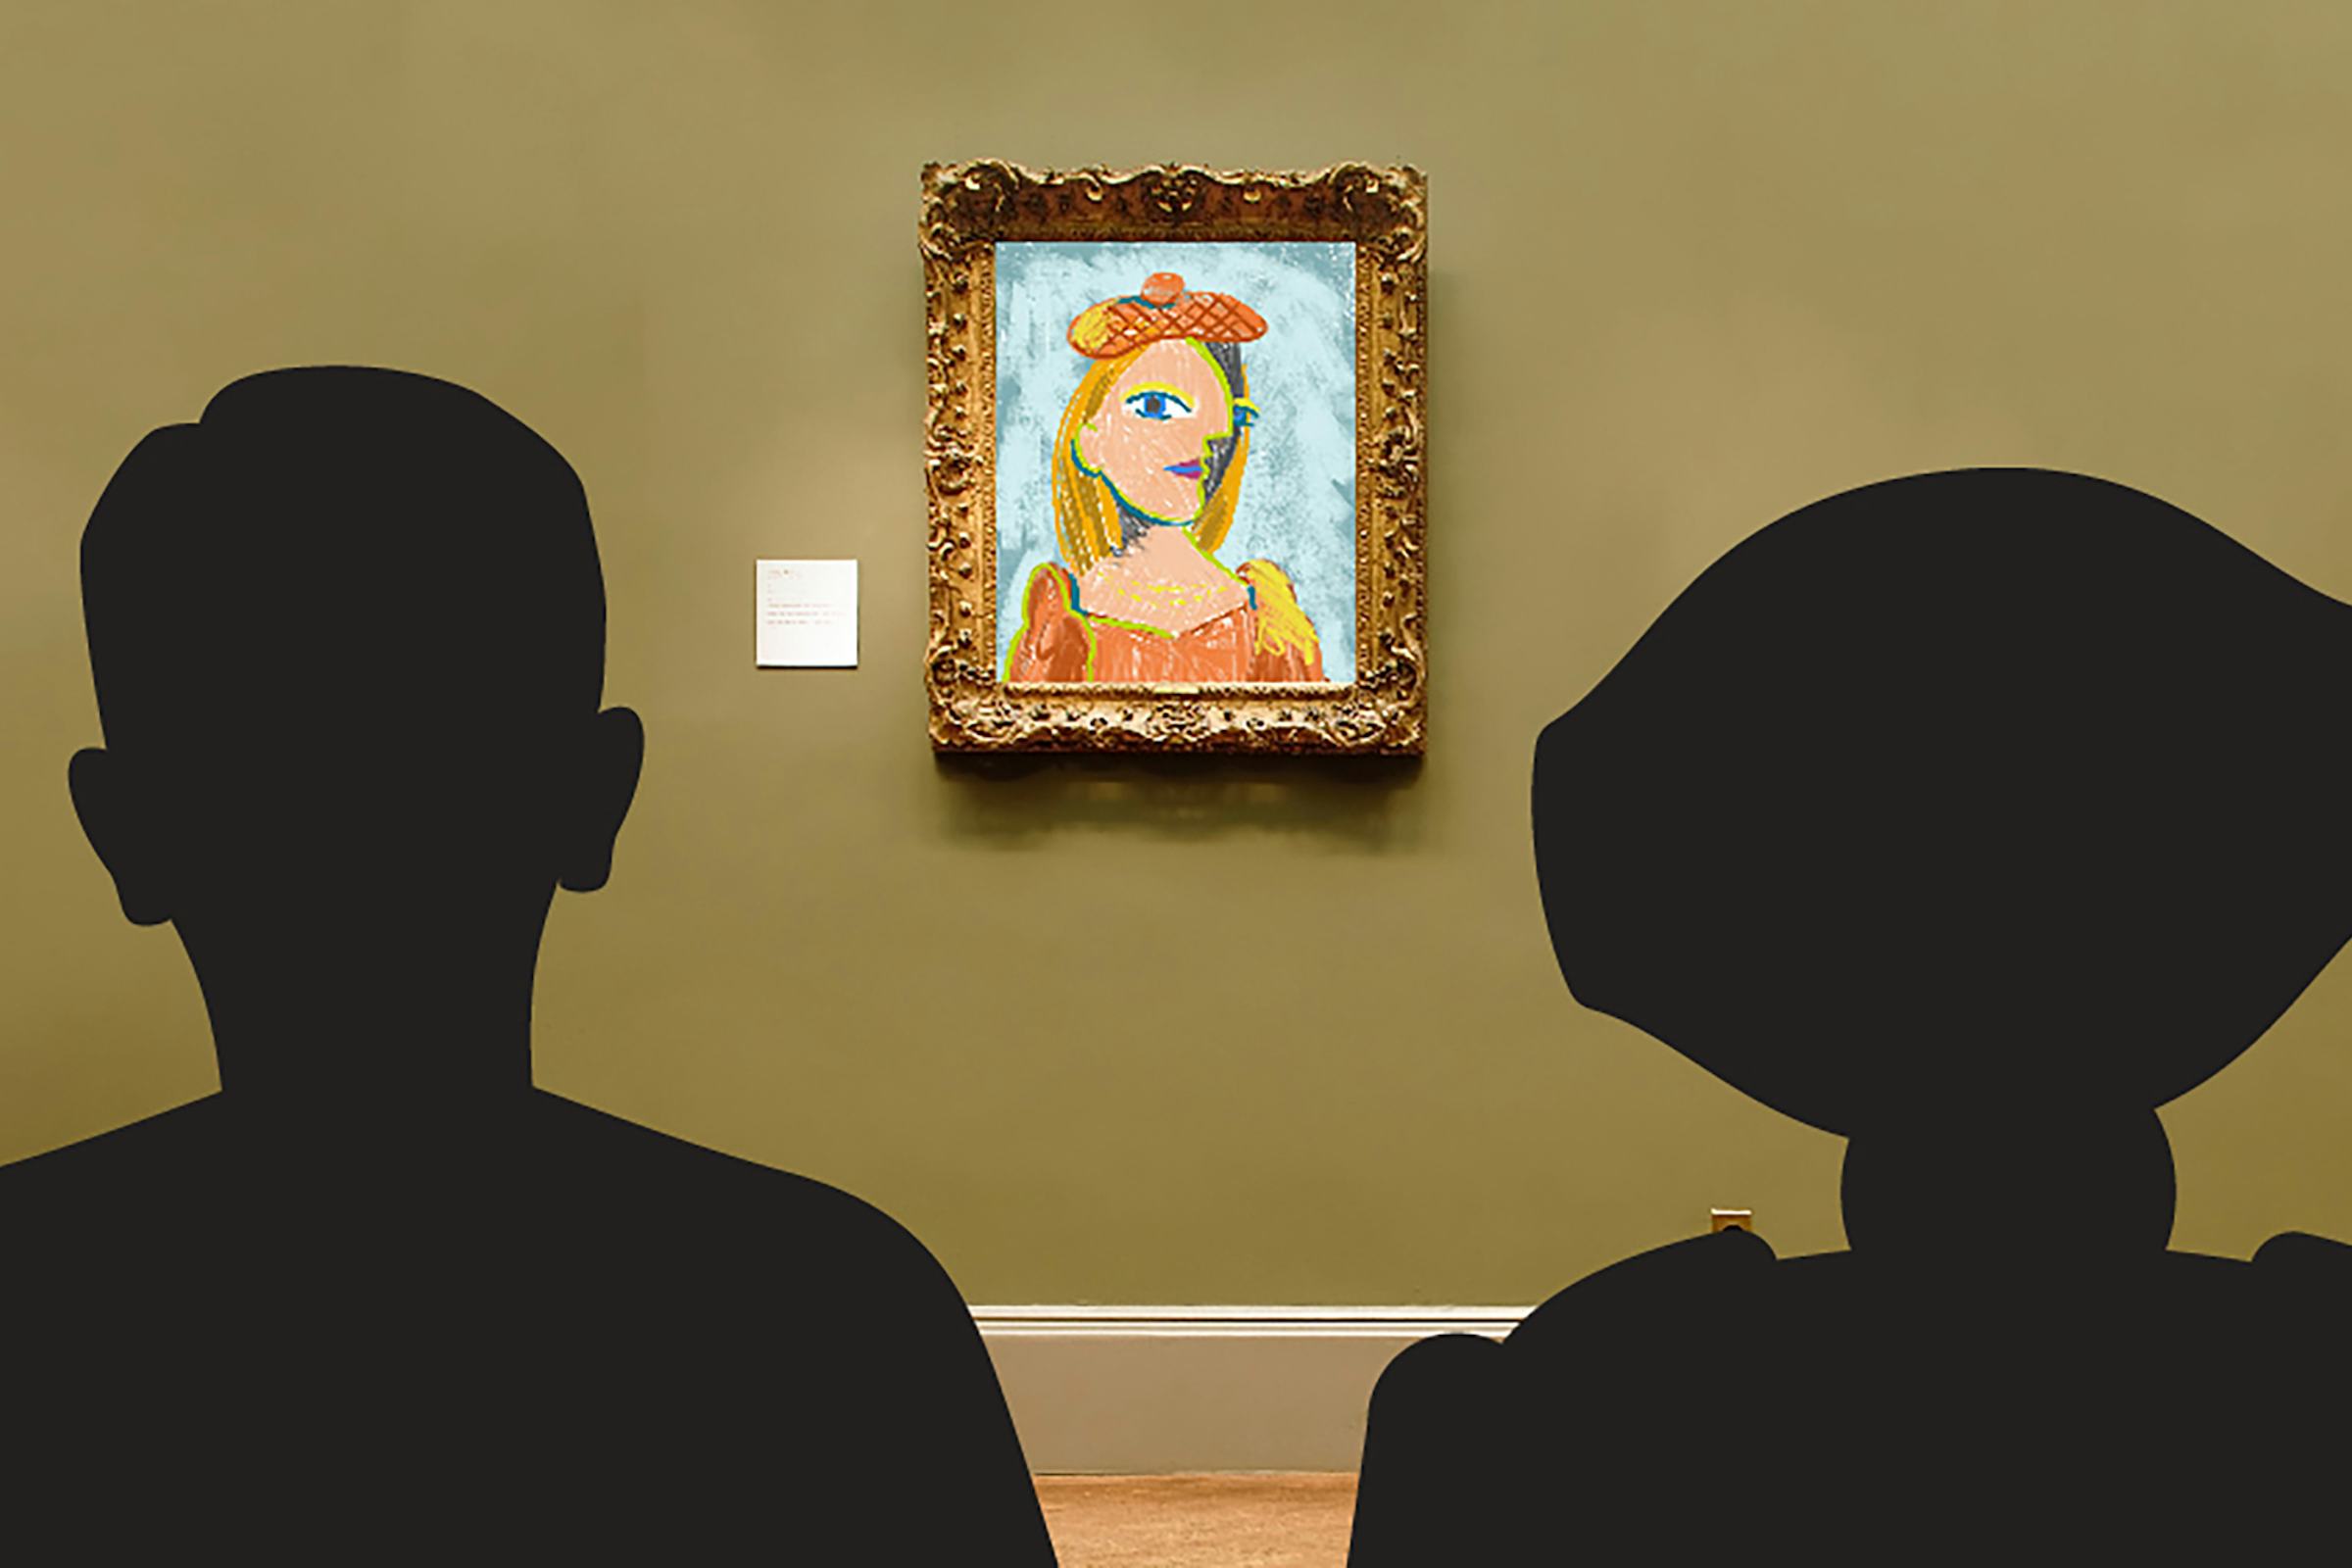 Silhouettes of a human and a robot looking at a painting in a museum